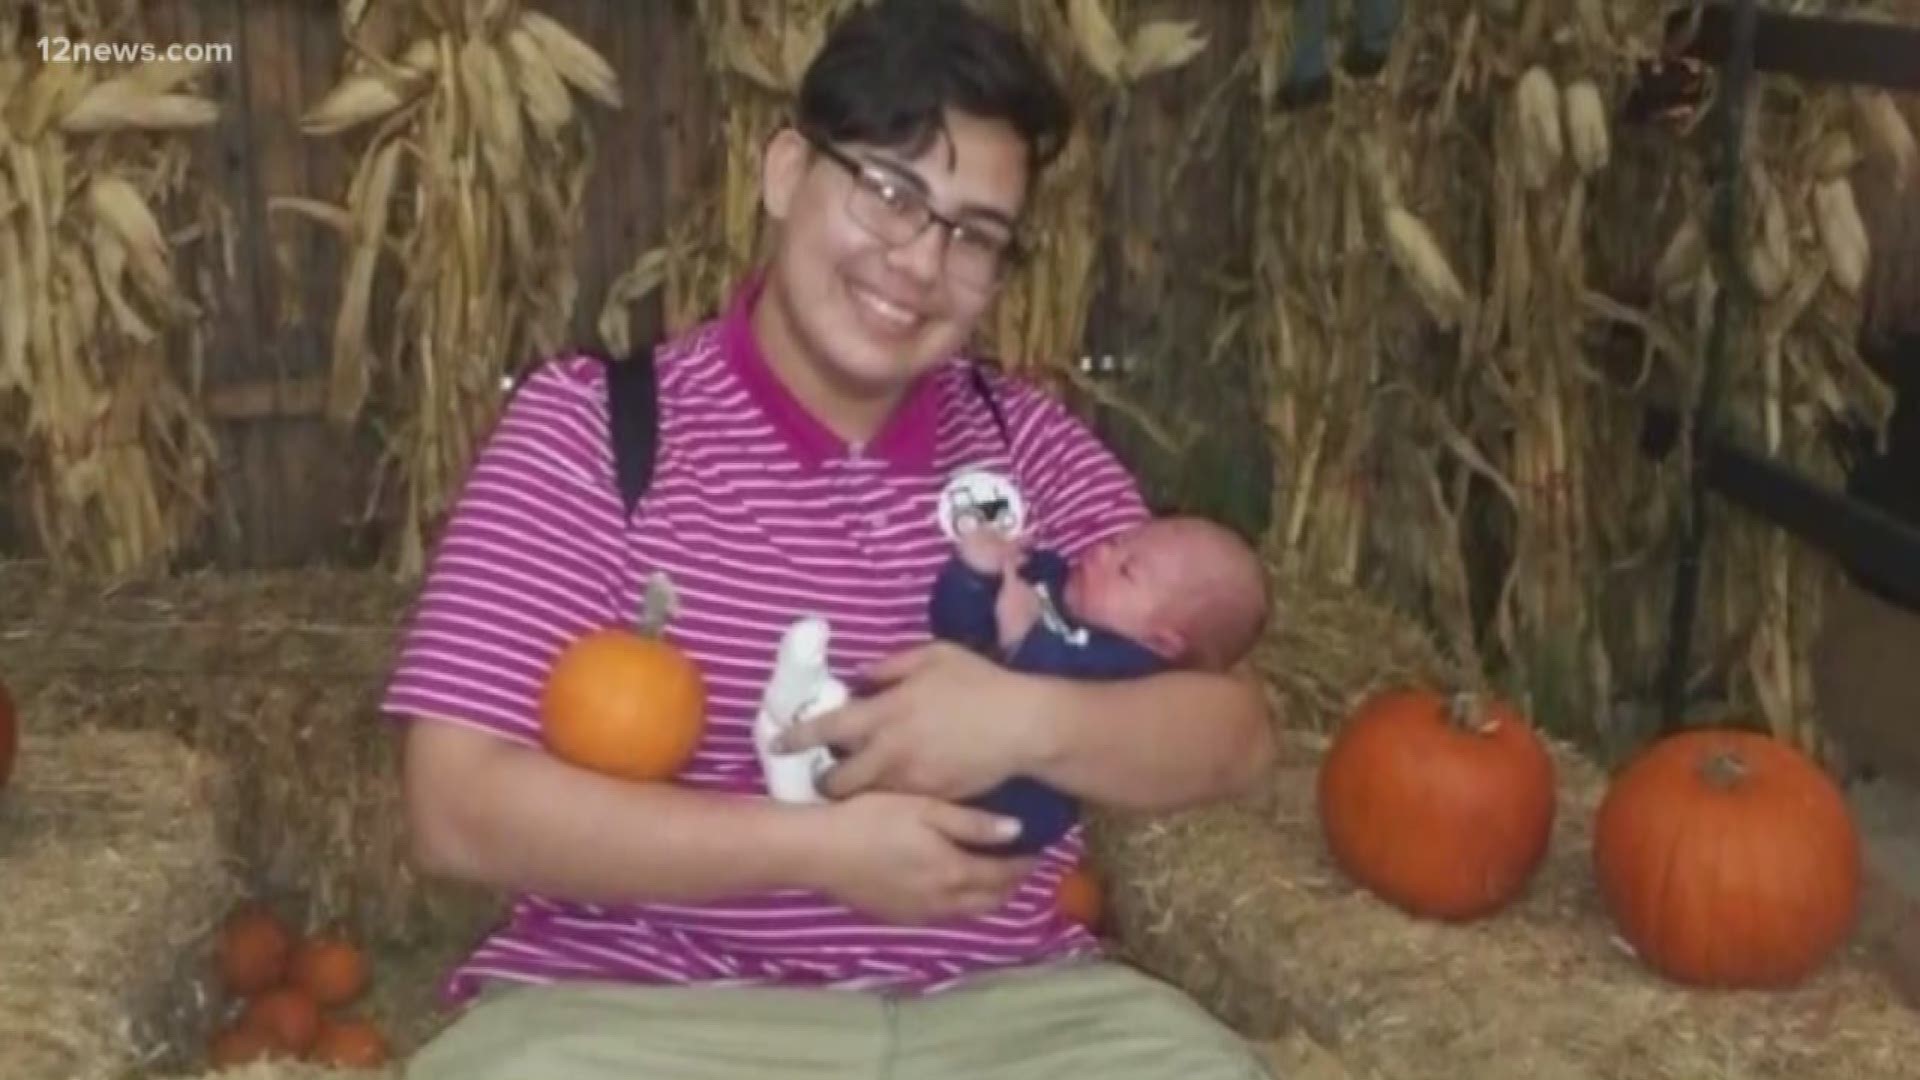 4-week-old Rainer was found dead in his mother's apartment. Today, the infant's father spoke out about the loss.